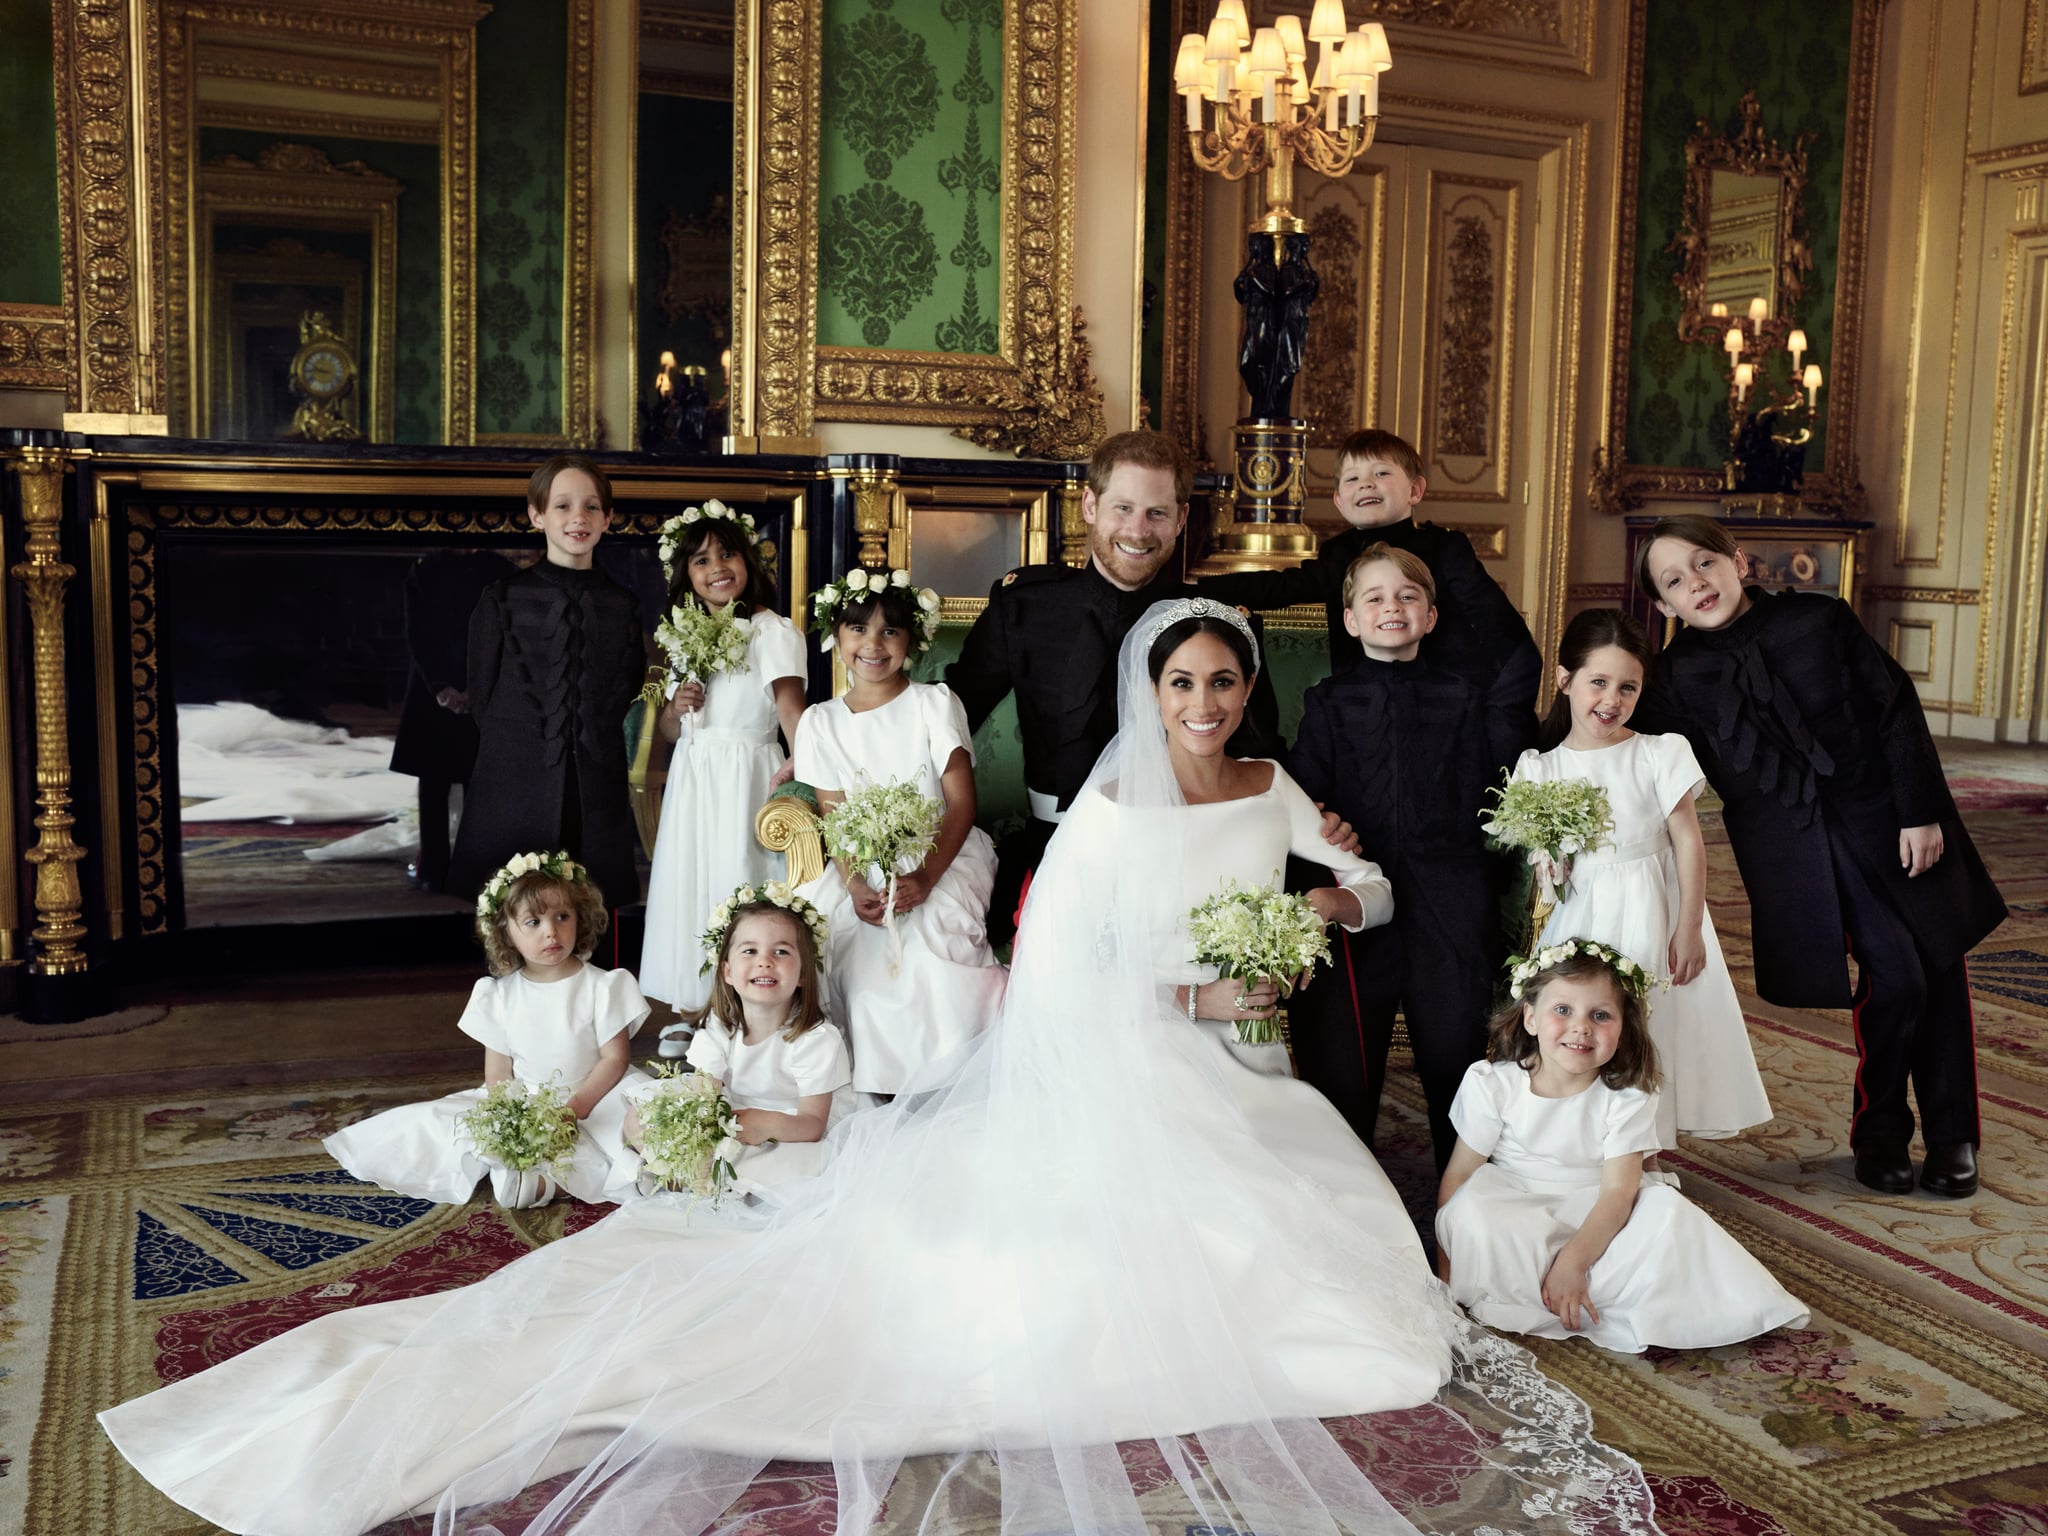 WINDSOR, UNITED KINGDOM - MAY 19: In this handout image released by the Duke and Duchess of Sussex, the Duke and Duchess of Sussex pose for an official wedding photograph with (left-to-right): Back row: Master Brian Mulroney, Miss Remi Litt, Miss Rylan Litt, Master Jasper Dyer, Prince George, Miss Ivy Mulroney, Master John Mulroney. Front row: Miss Zalie Warren, Princess Charlotte, Miss Florence van Cutsem in The Green Drawing Room at Windsor Castle on May 19, 2018 in Windsor, England. (Photo by Alexi Lubomirski/The Duke and Duchess of Sussex via Getty Images) NEWS EDITORIAL USE ONLY.  NO COMMERCIAL USE. NO MERCHANDISING, ADVERTISING, SOUVENIRS, MEMORABILIA or COLOURABLY SIMILAR. NOT FOR USE AFTER 31 DECEMBER 2018 WITHOUT PRIOR PERMISSION FROM KENSINGTON PALACE. NO CROPPING. Copyright in the photograph is vested in The Duke and Duchess of Sussex. Publications are asked to credit the photograph to Alexi Lubomirski. No charge should be made for the supply, release or publication of the photograph. The photograph must not be digitally enhanced, manipulated or modified in any manner or form and must include all of the individuals in the photograph when published.